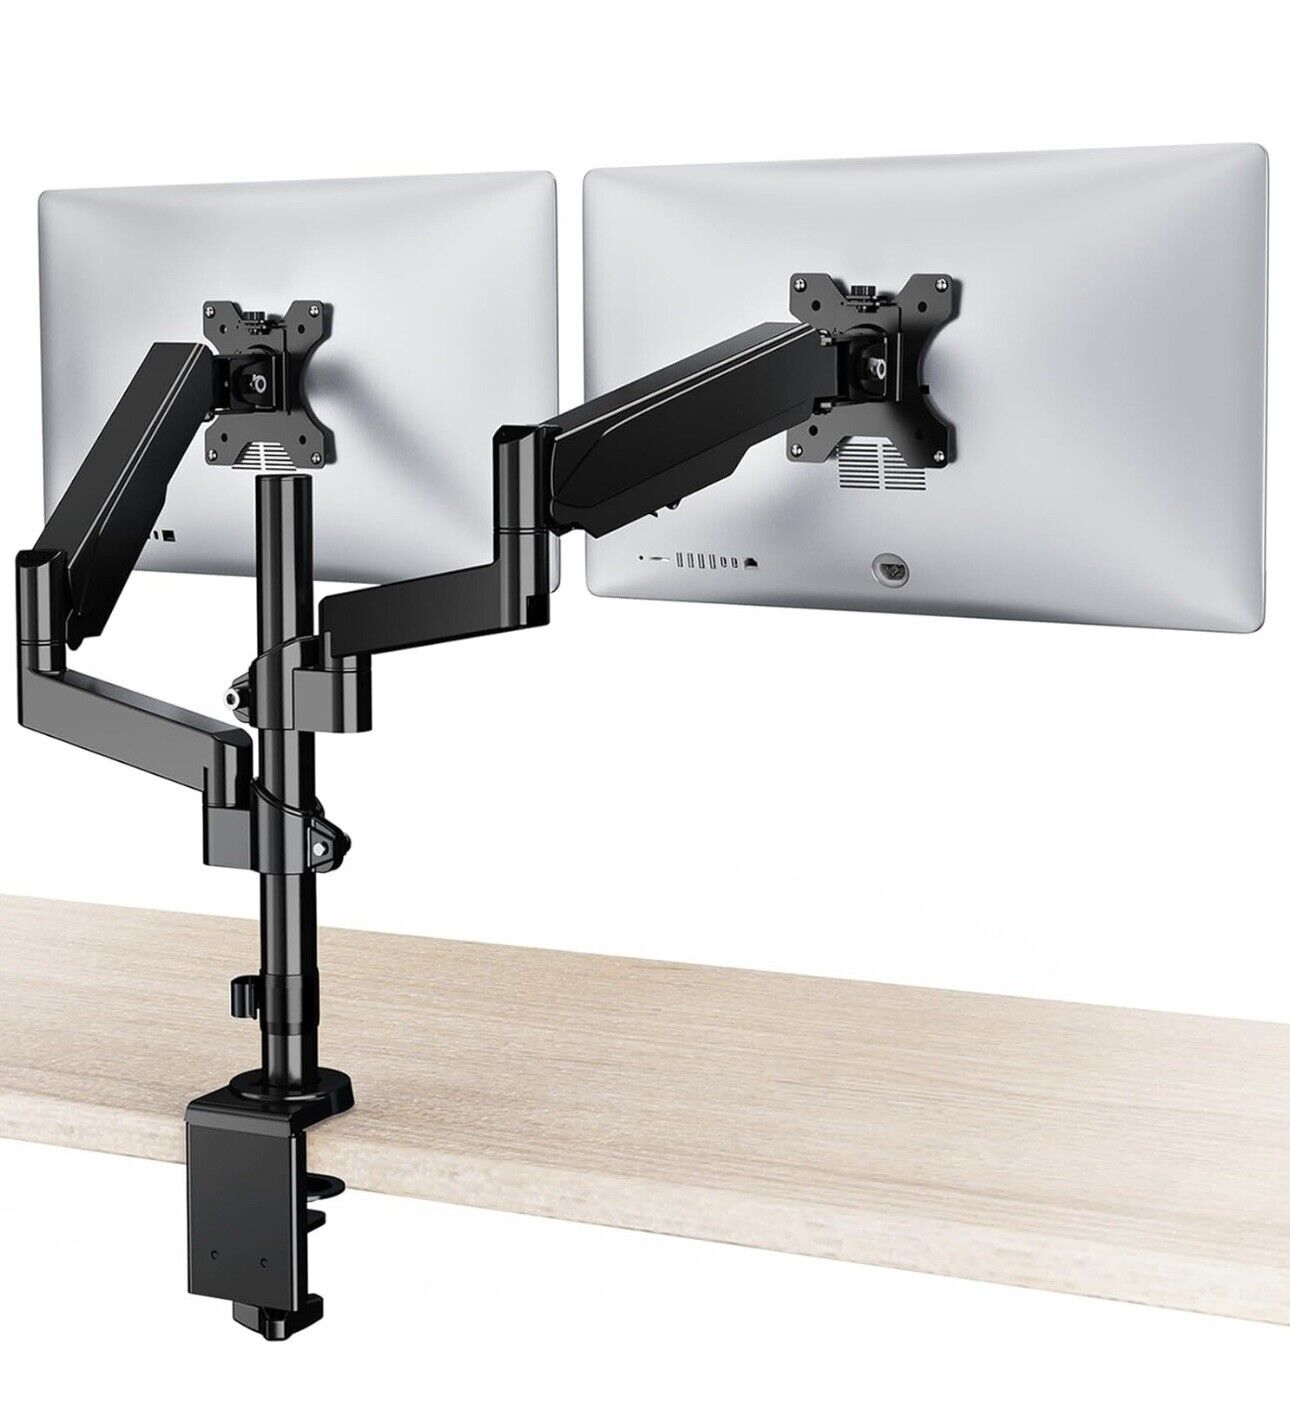 WALI Dual Monitor Mount, Adjustable Gas Spring Arms Mount for 2 Monitors GSDM002